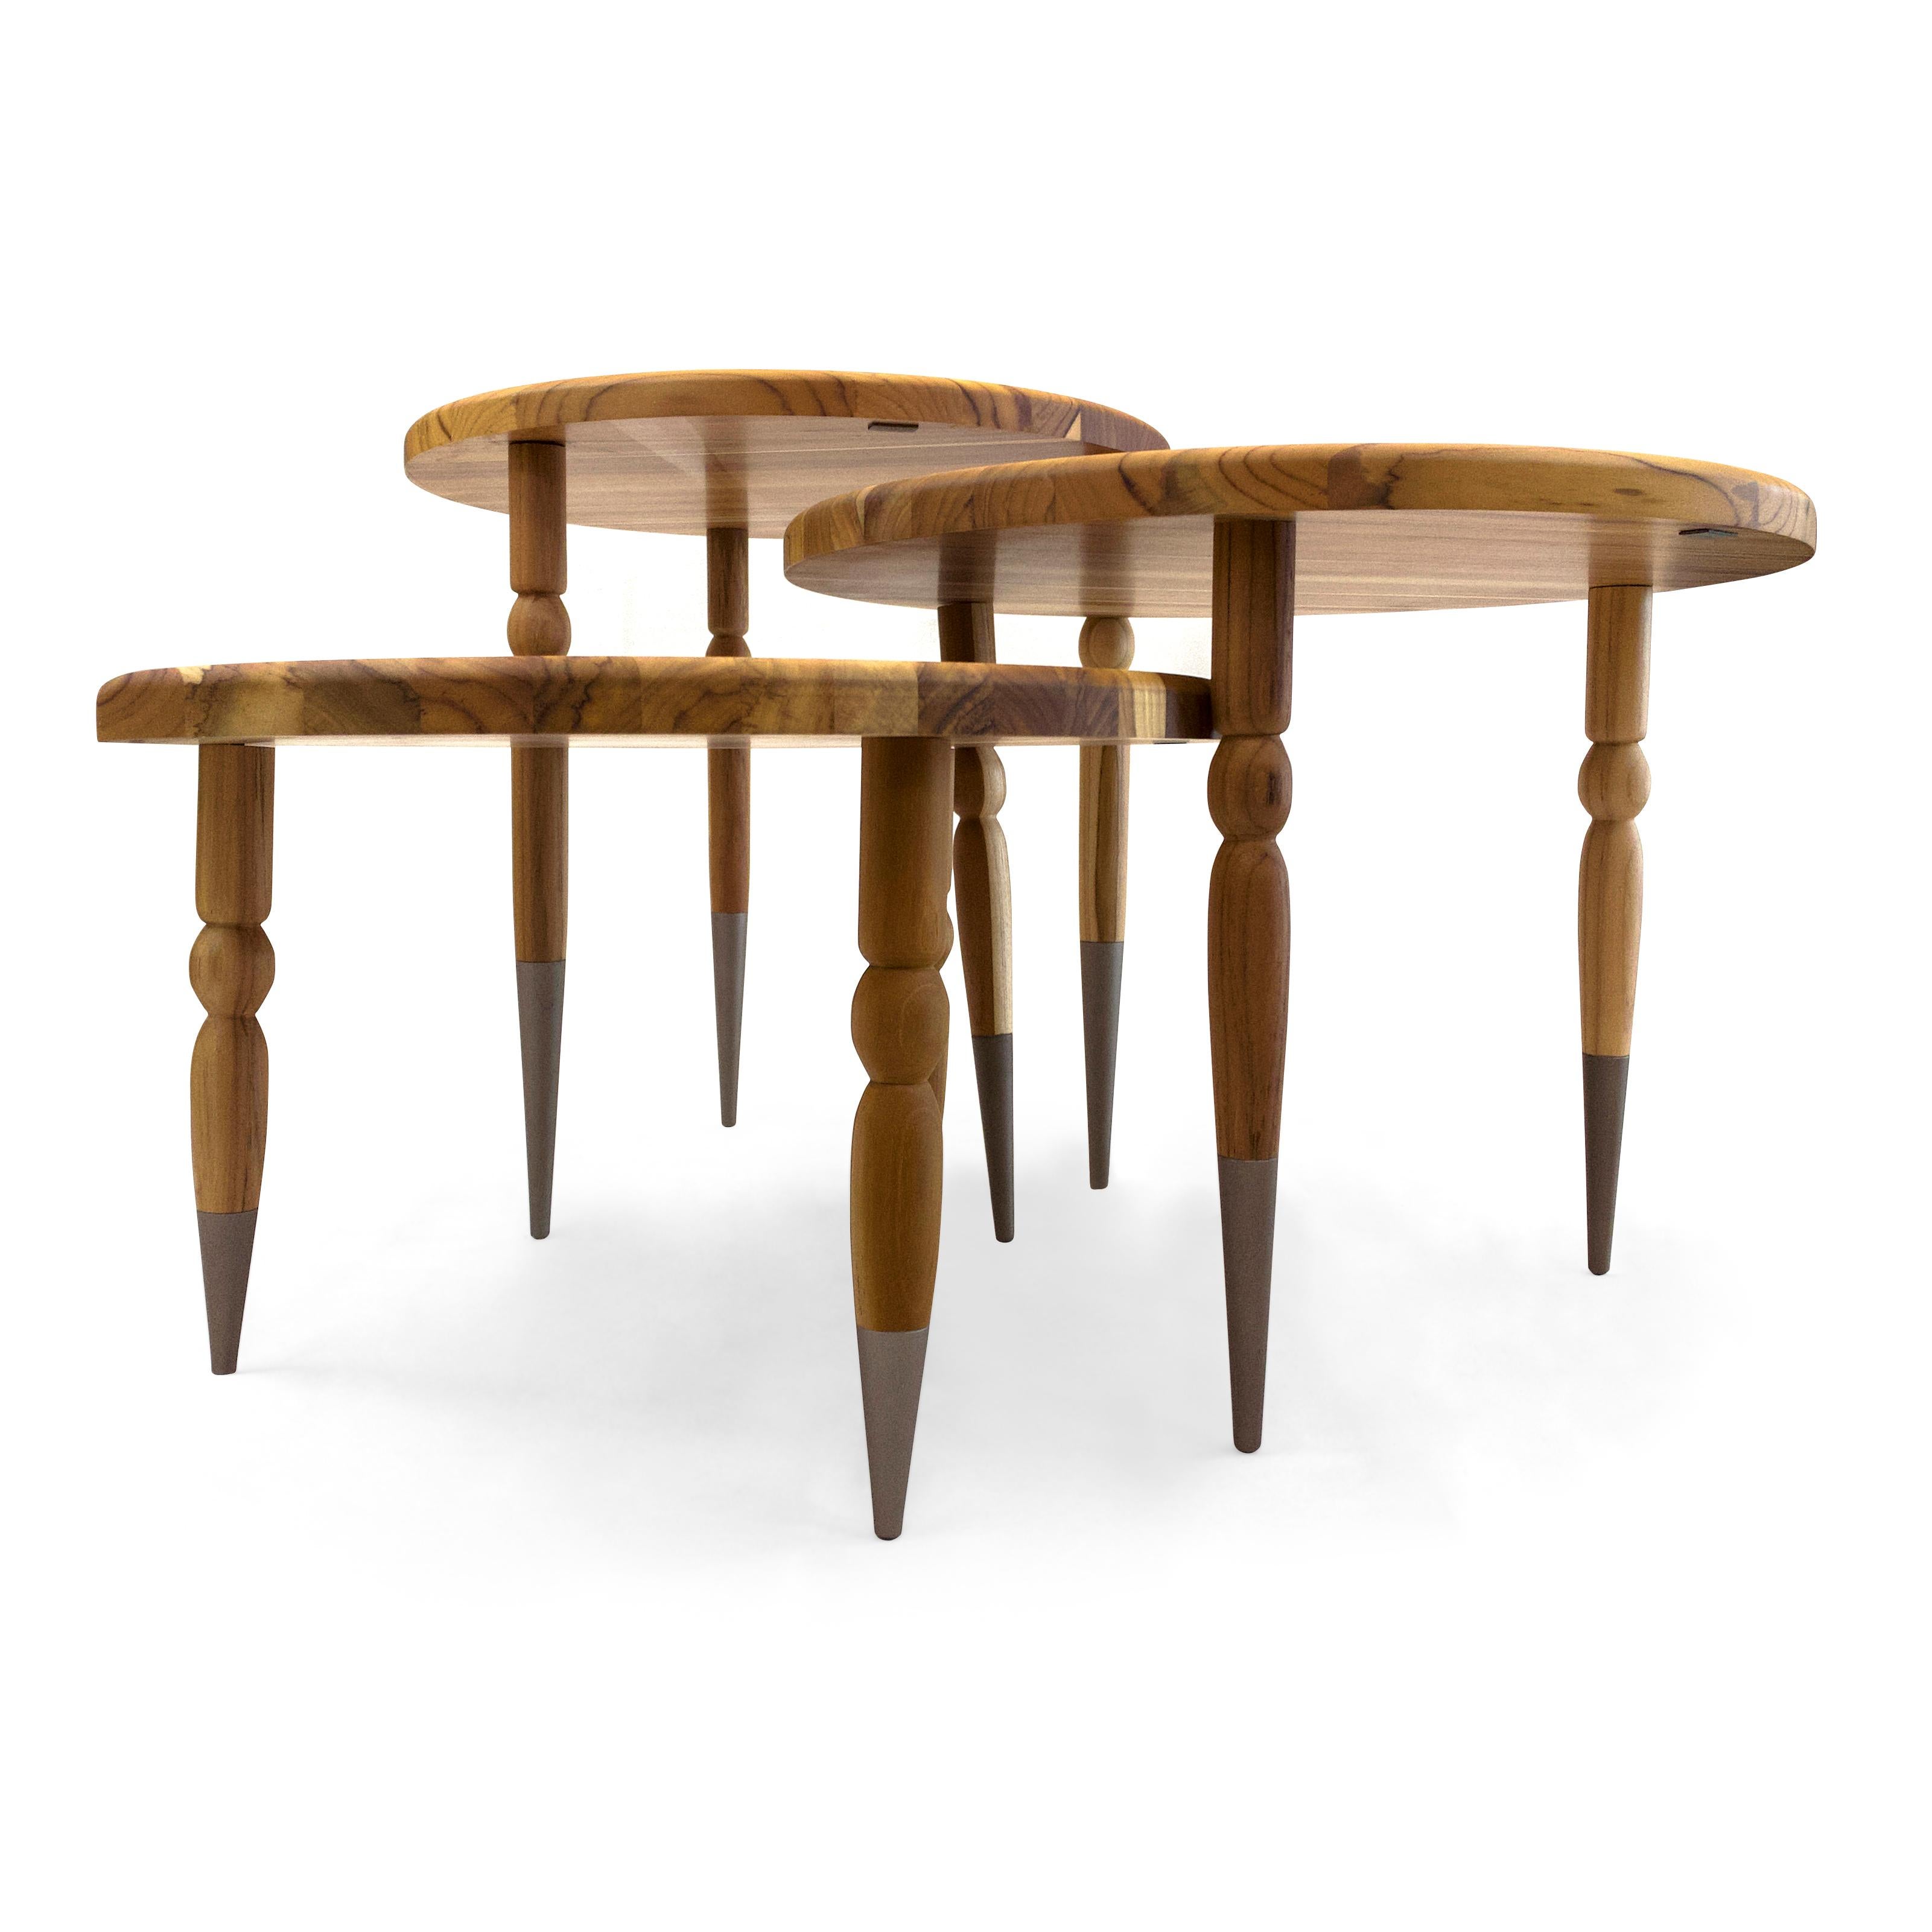 This beautiful set created by our amazing Uultis design team is a set of three occasional tables in a teak wood finish with chocolate shapely turned spindle legs that provide a sophisticated style that you will not regret having in your house. This